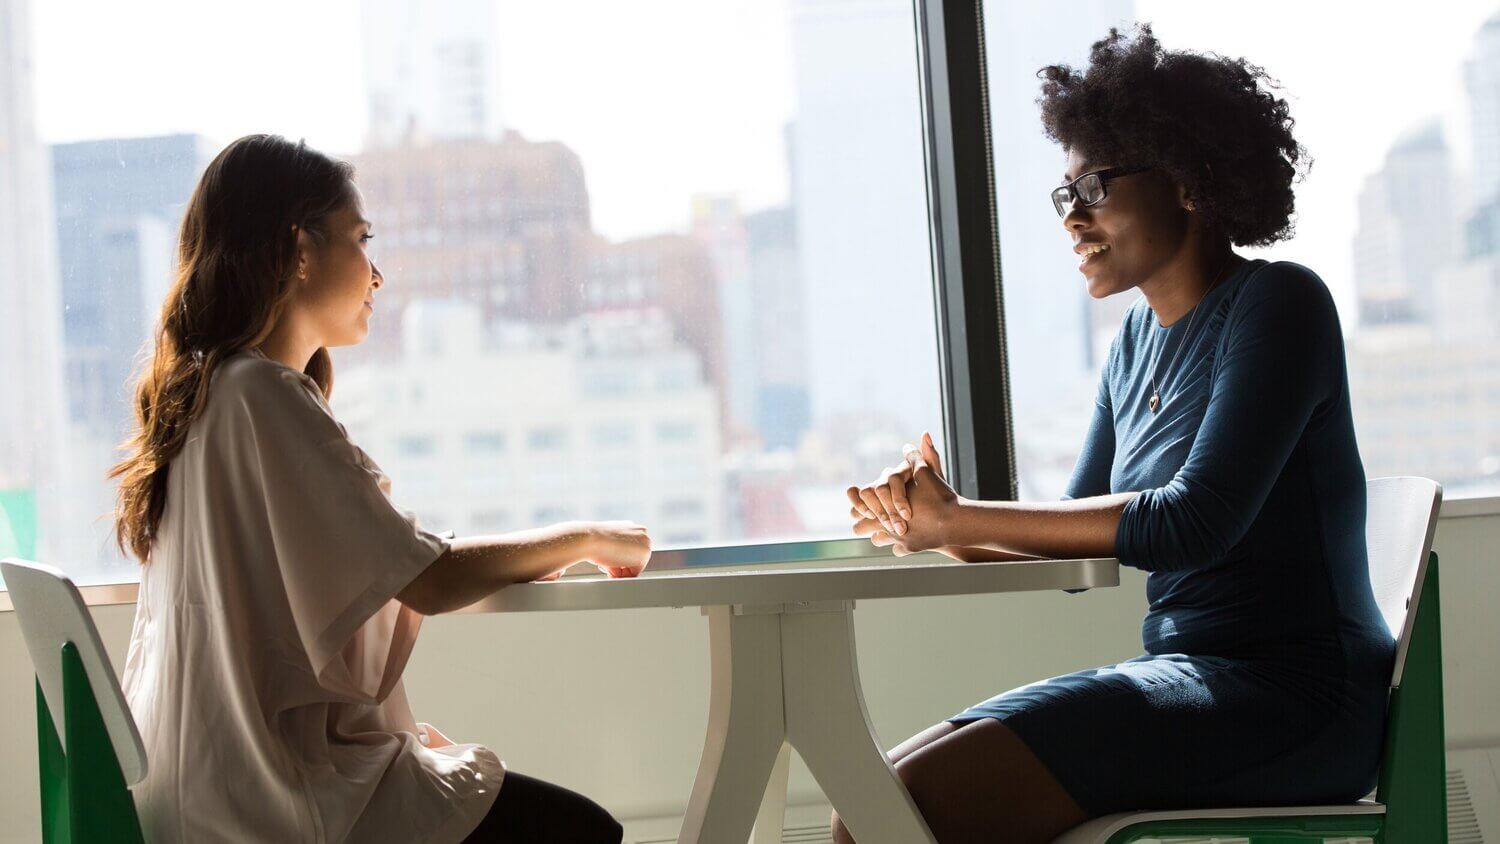 Inclusive stock photo of a black woman boss and employee